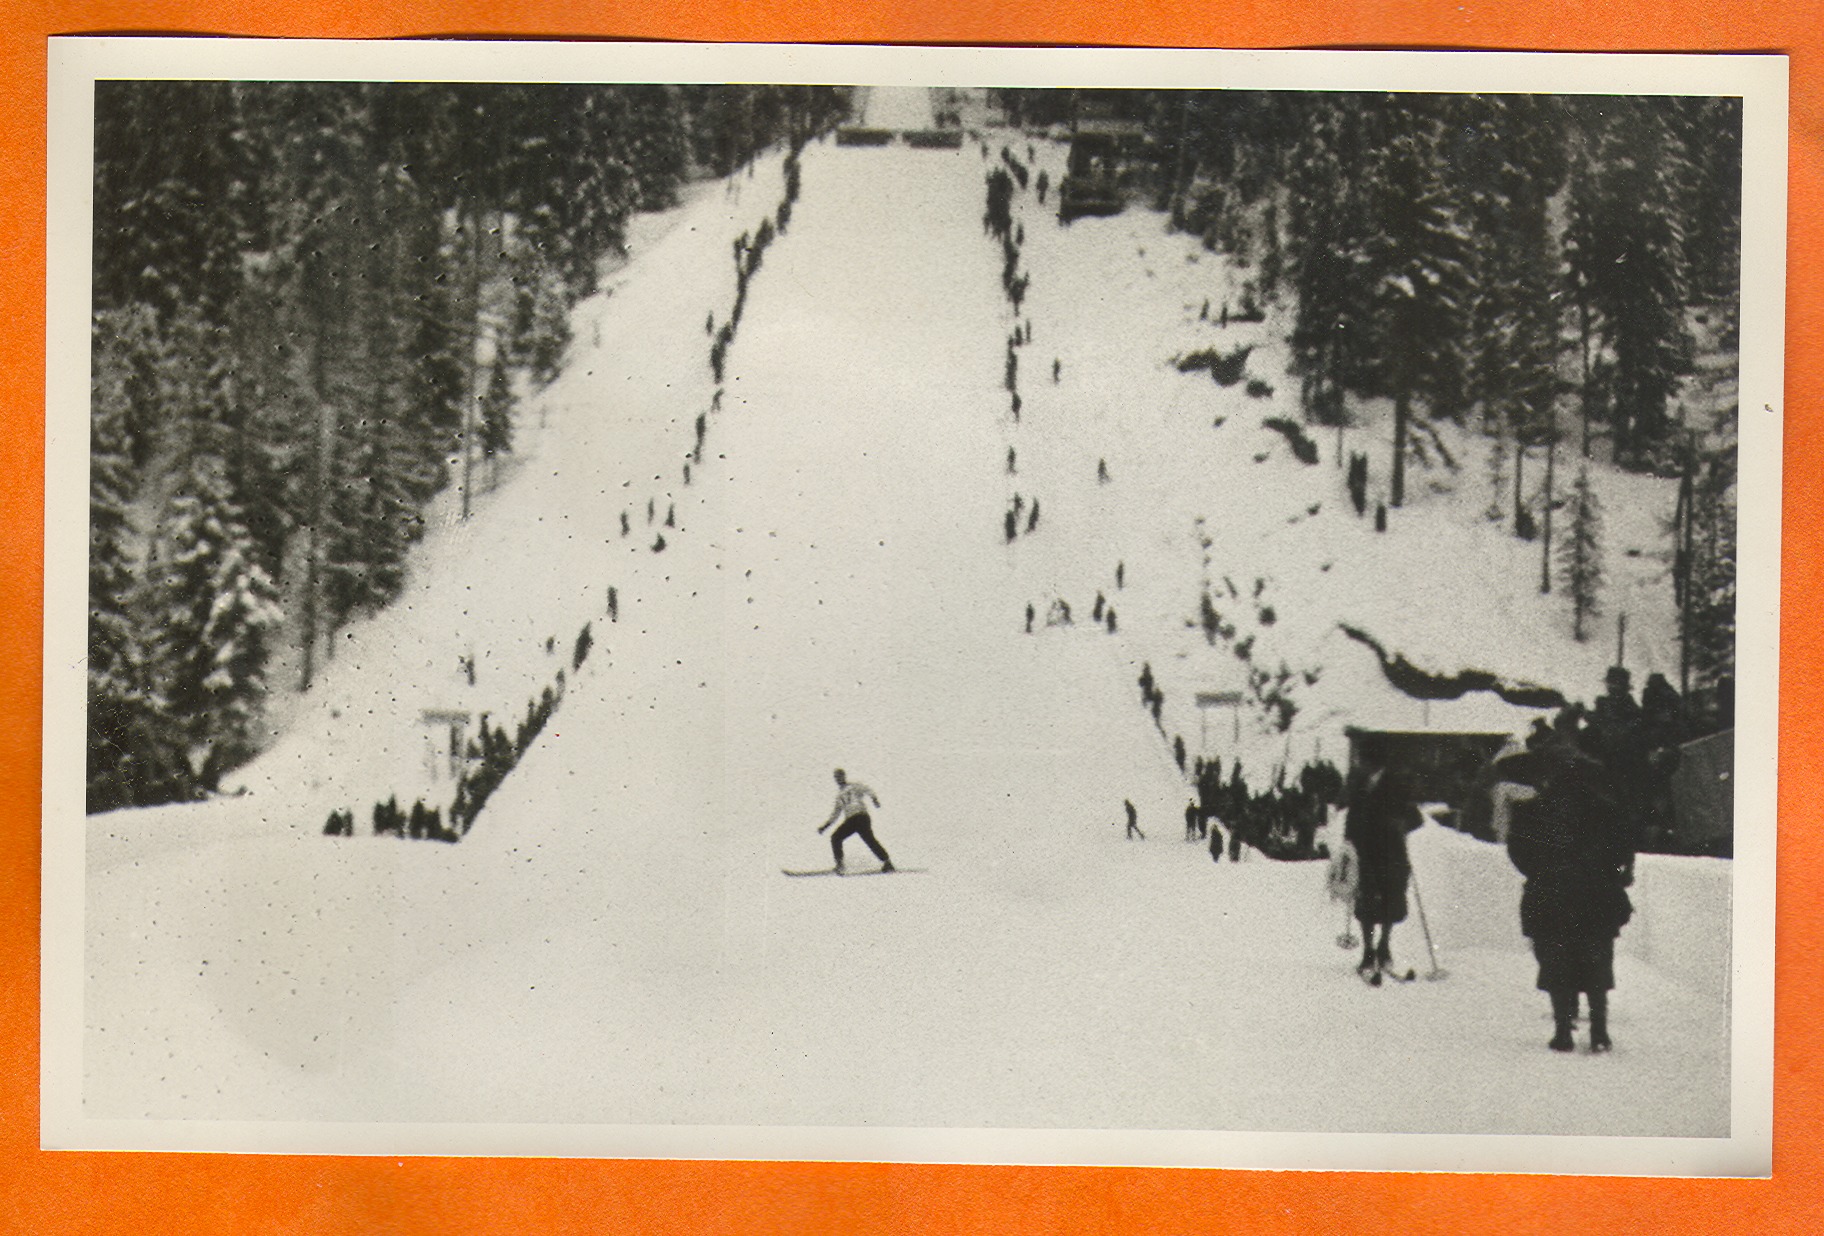 Skiers on a ski hill in Europe: photographic print